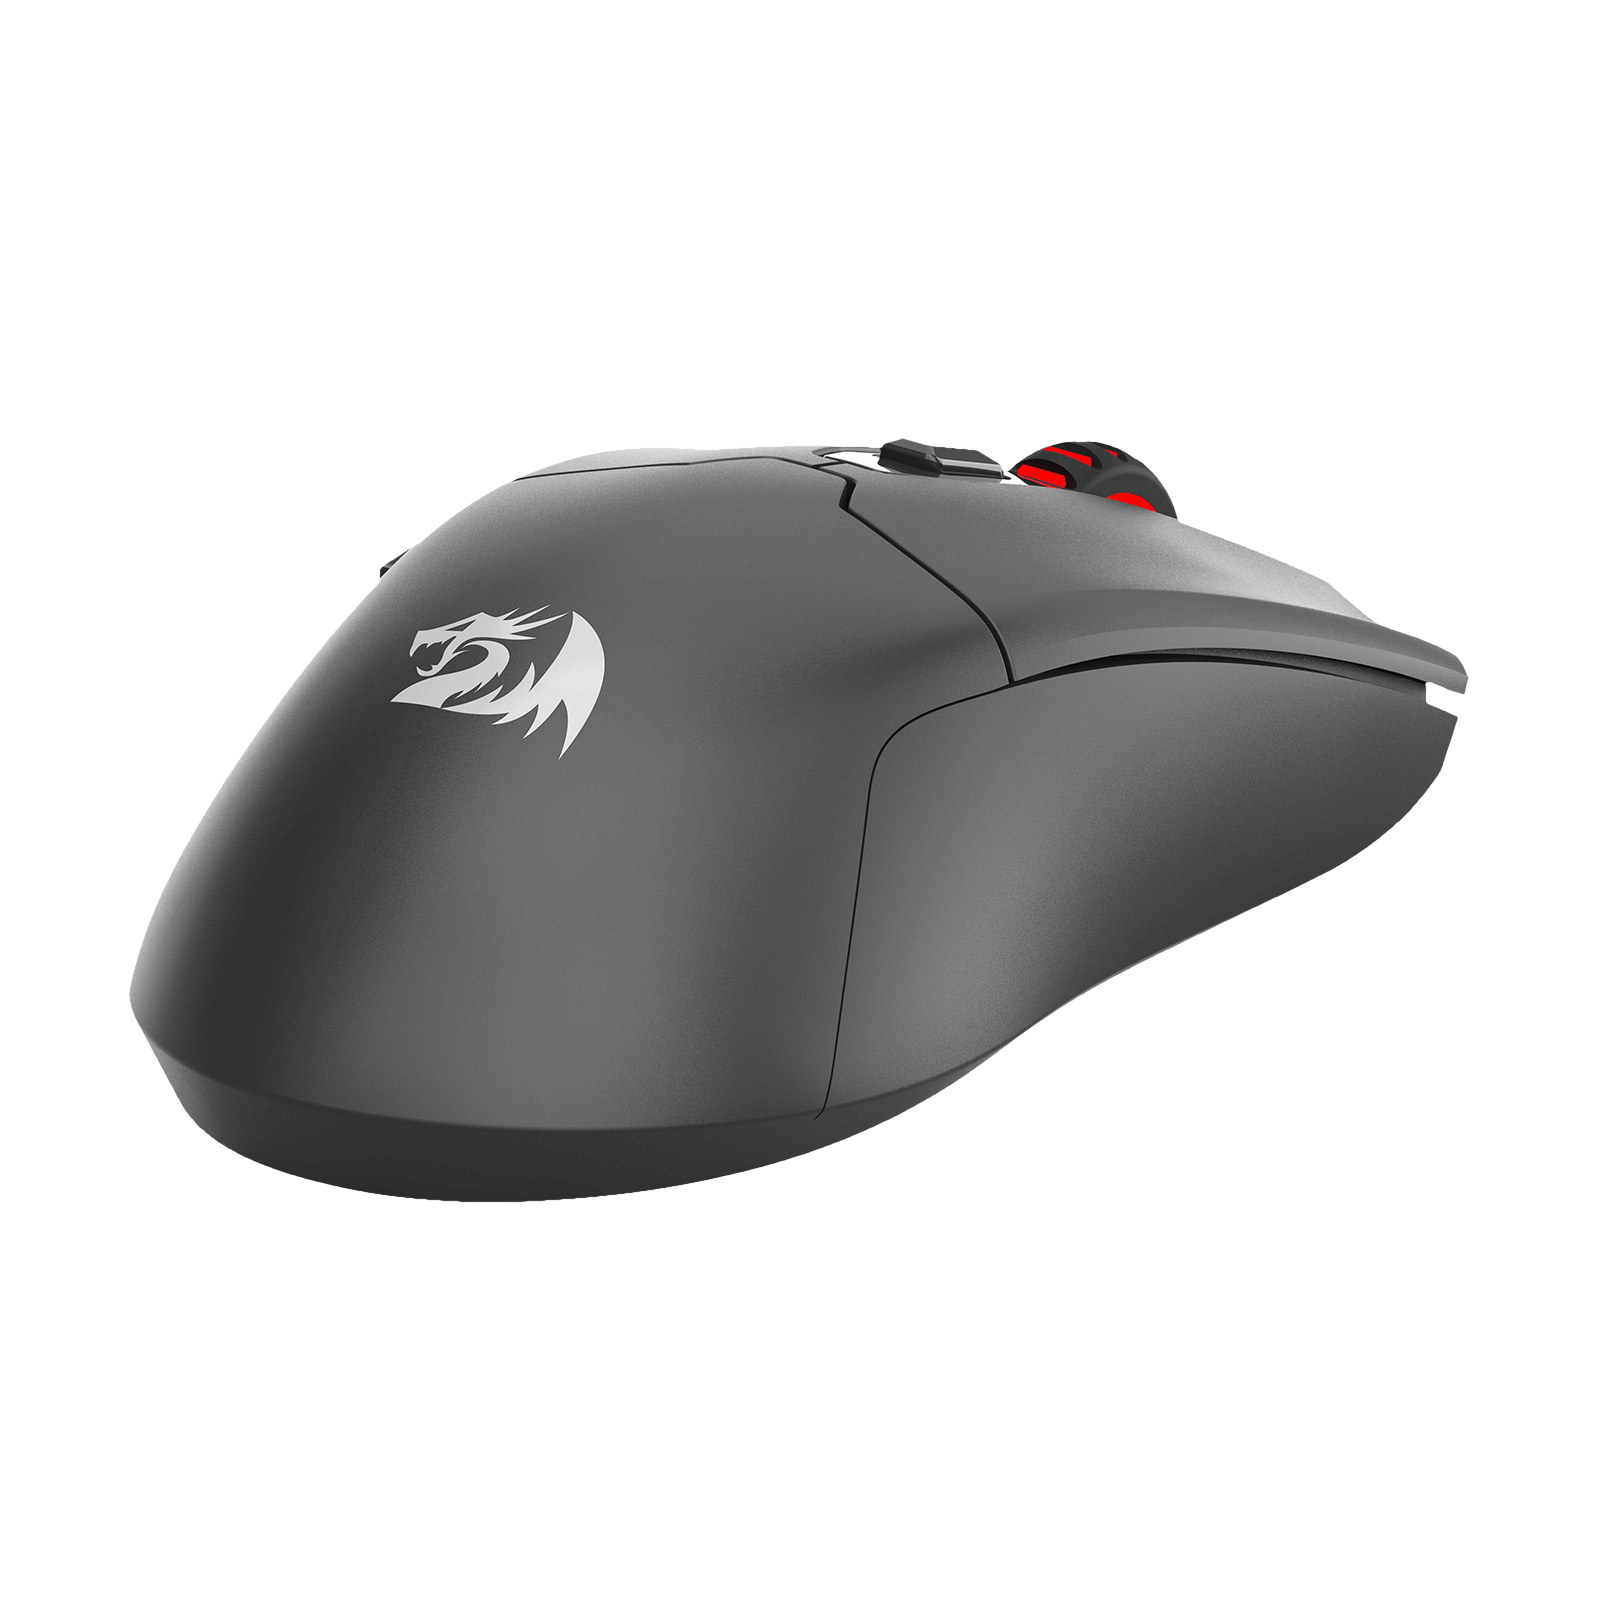 Redragon FYZU M995 BT/2.4G/Wired Tri-mode Gaming Mouse